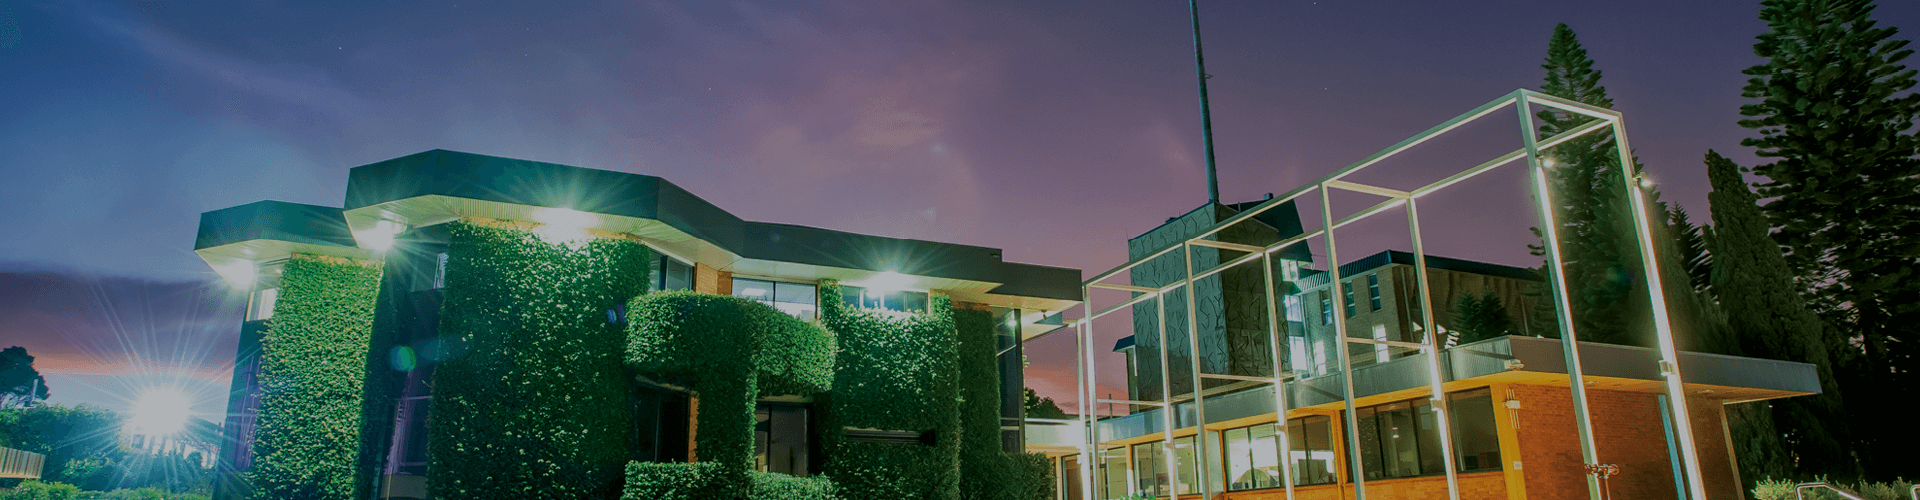 UniSQ Toowoomba illuminated at dusk with an artistic architectural design and surrounding greenery.